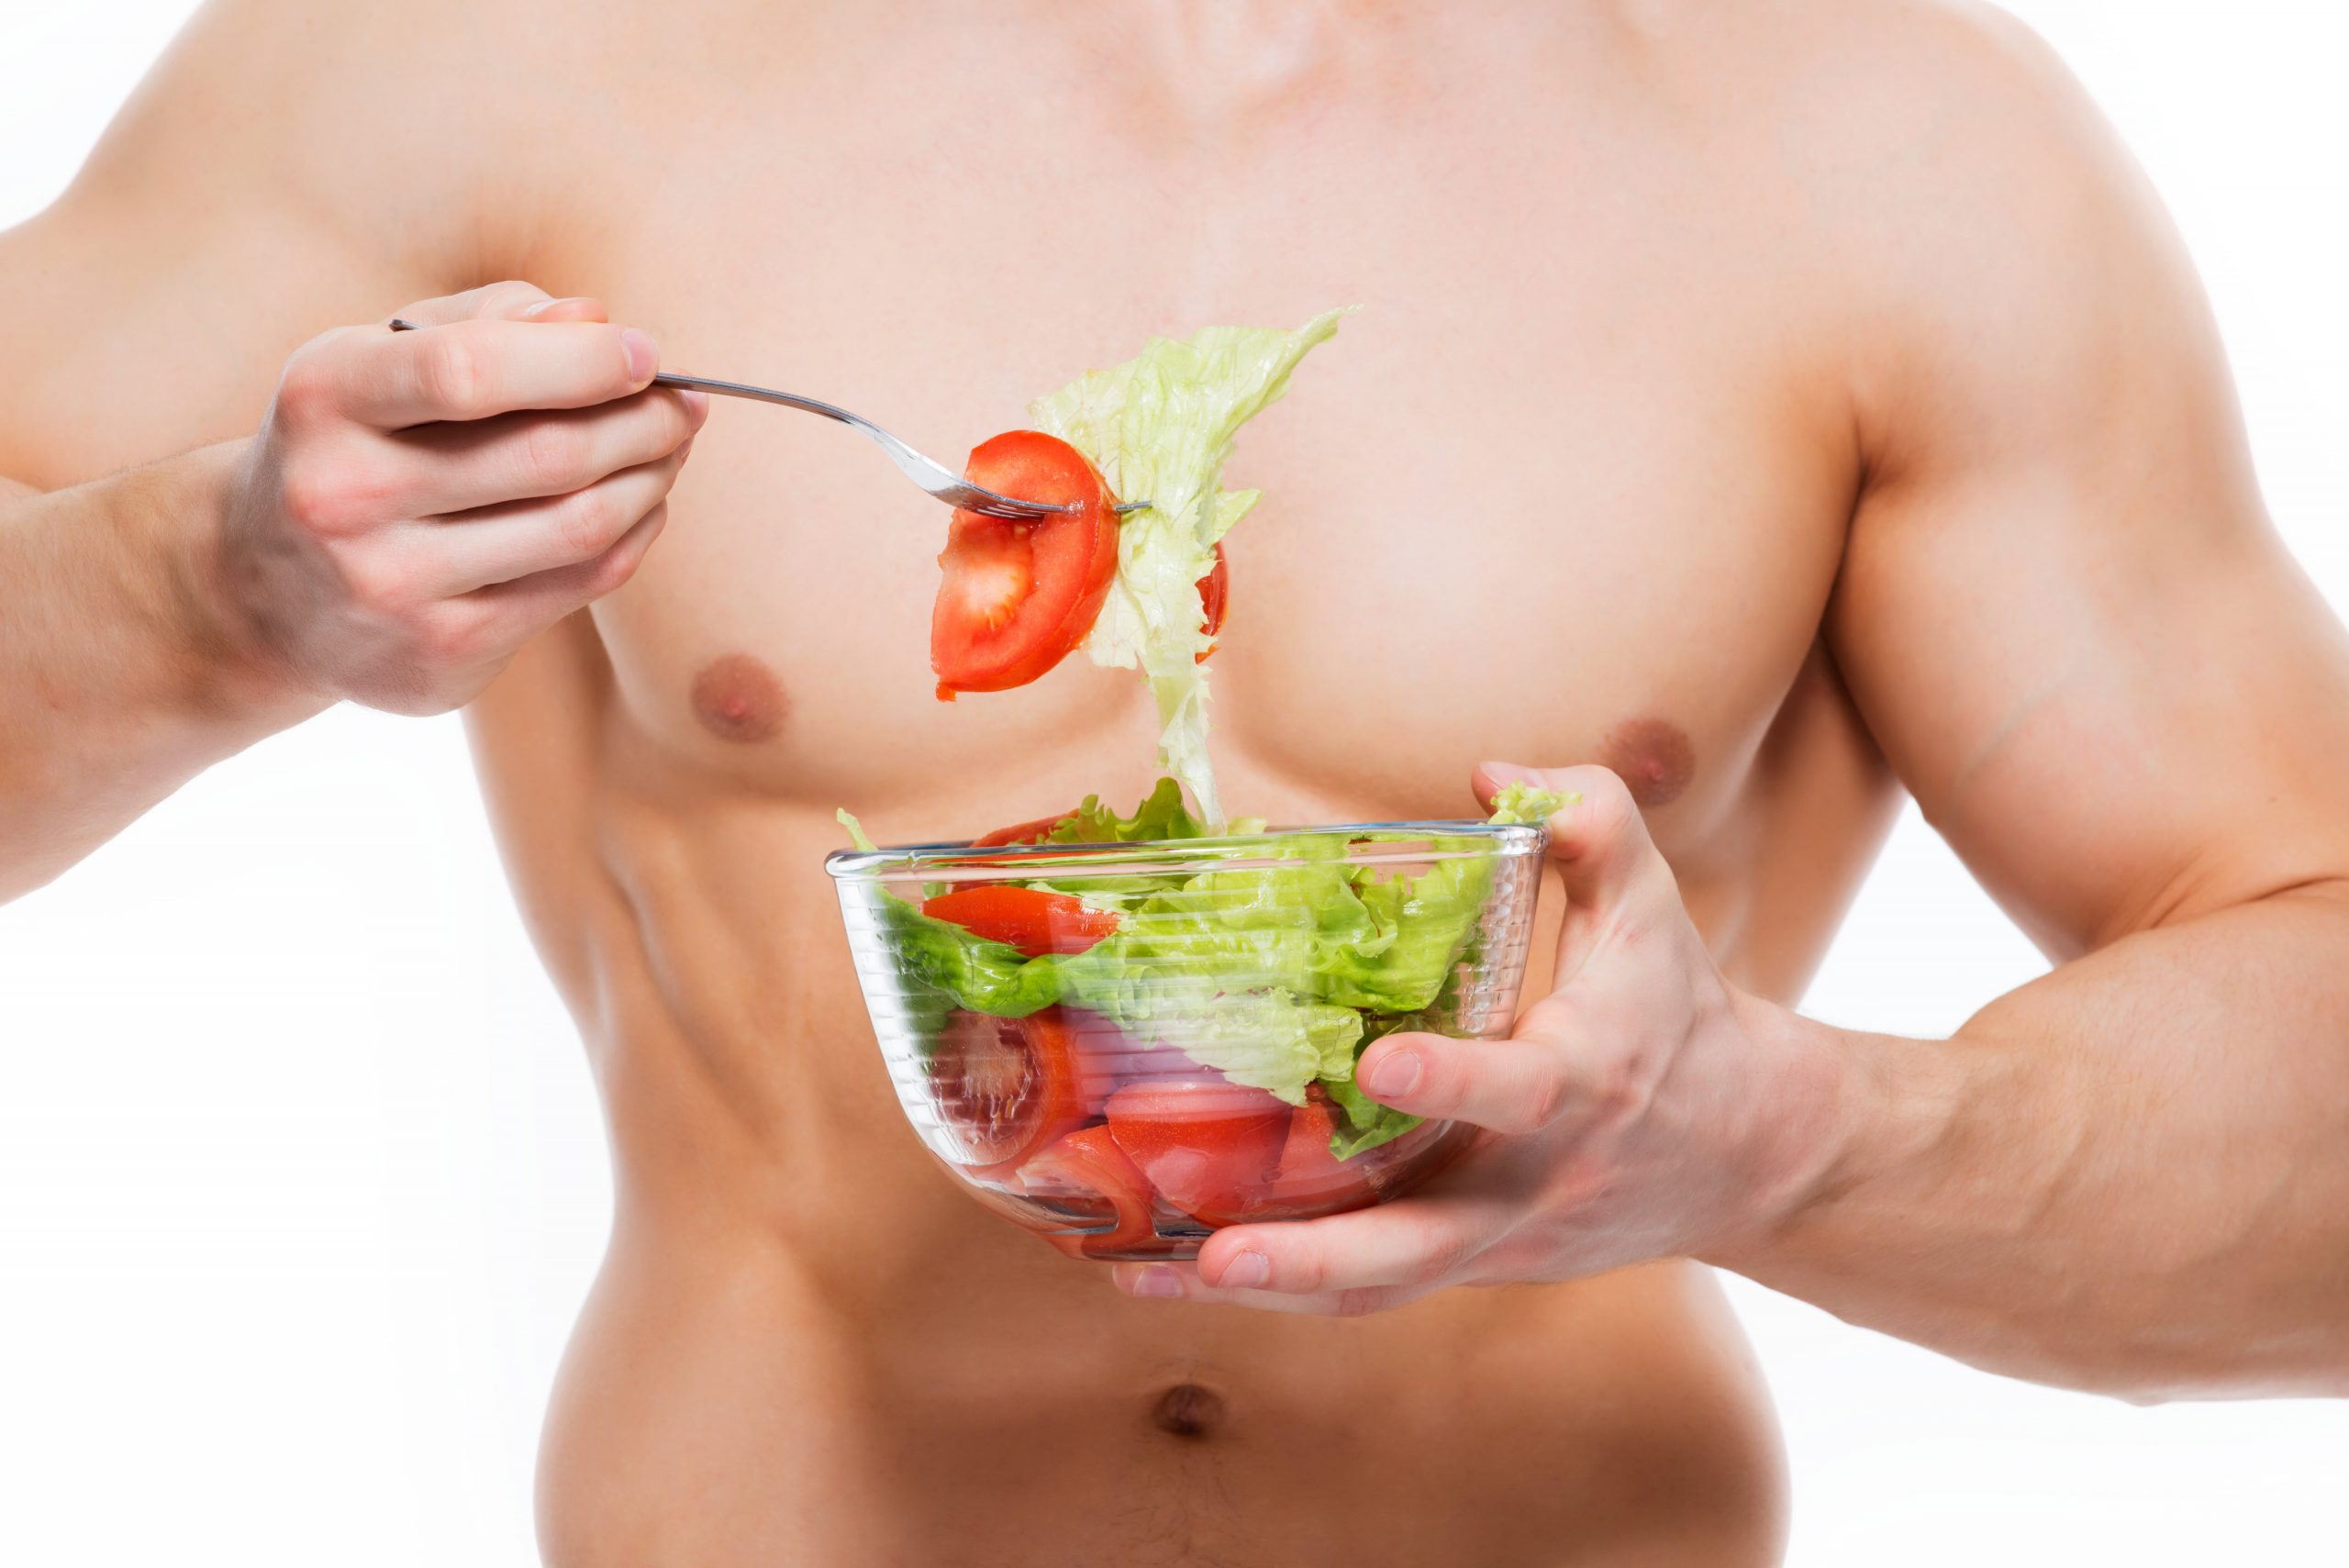 What should be in a bodybuilder’s diet?